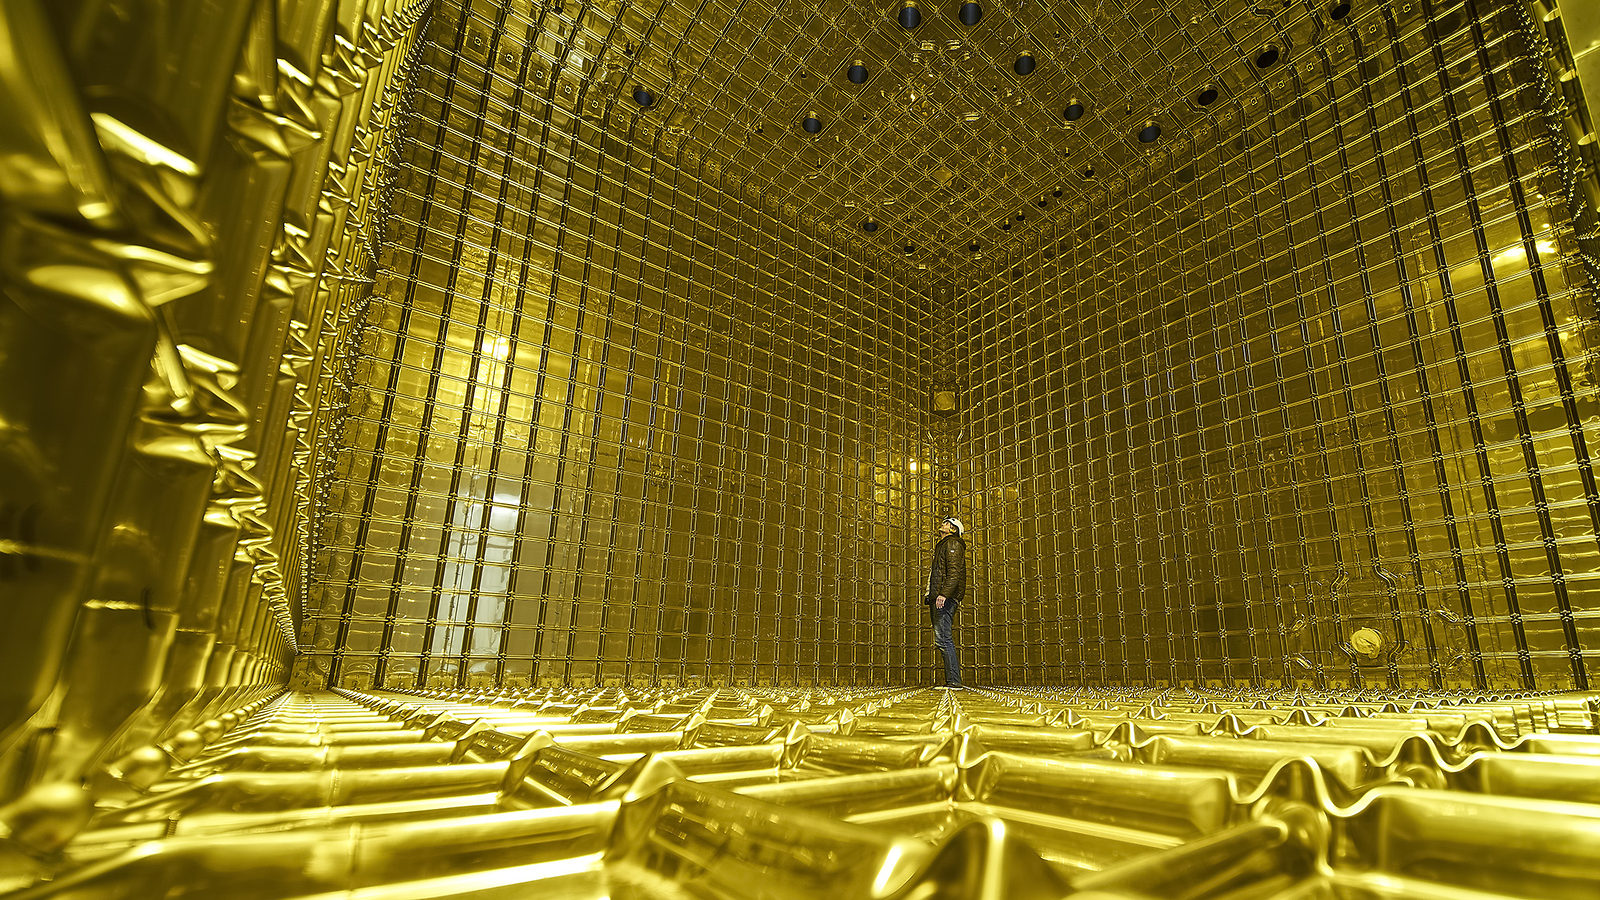 Photo of a person standing inside the ProtoDUNE detector, the walls, floor, and ceiling are all yellow